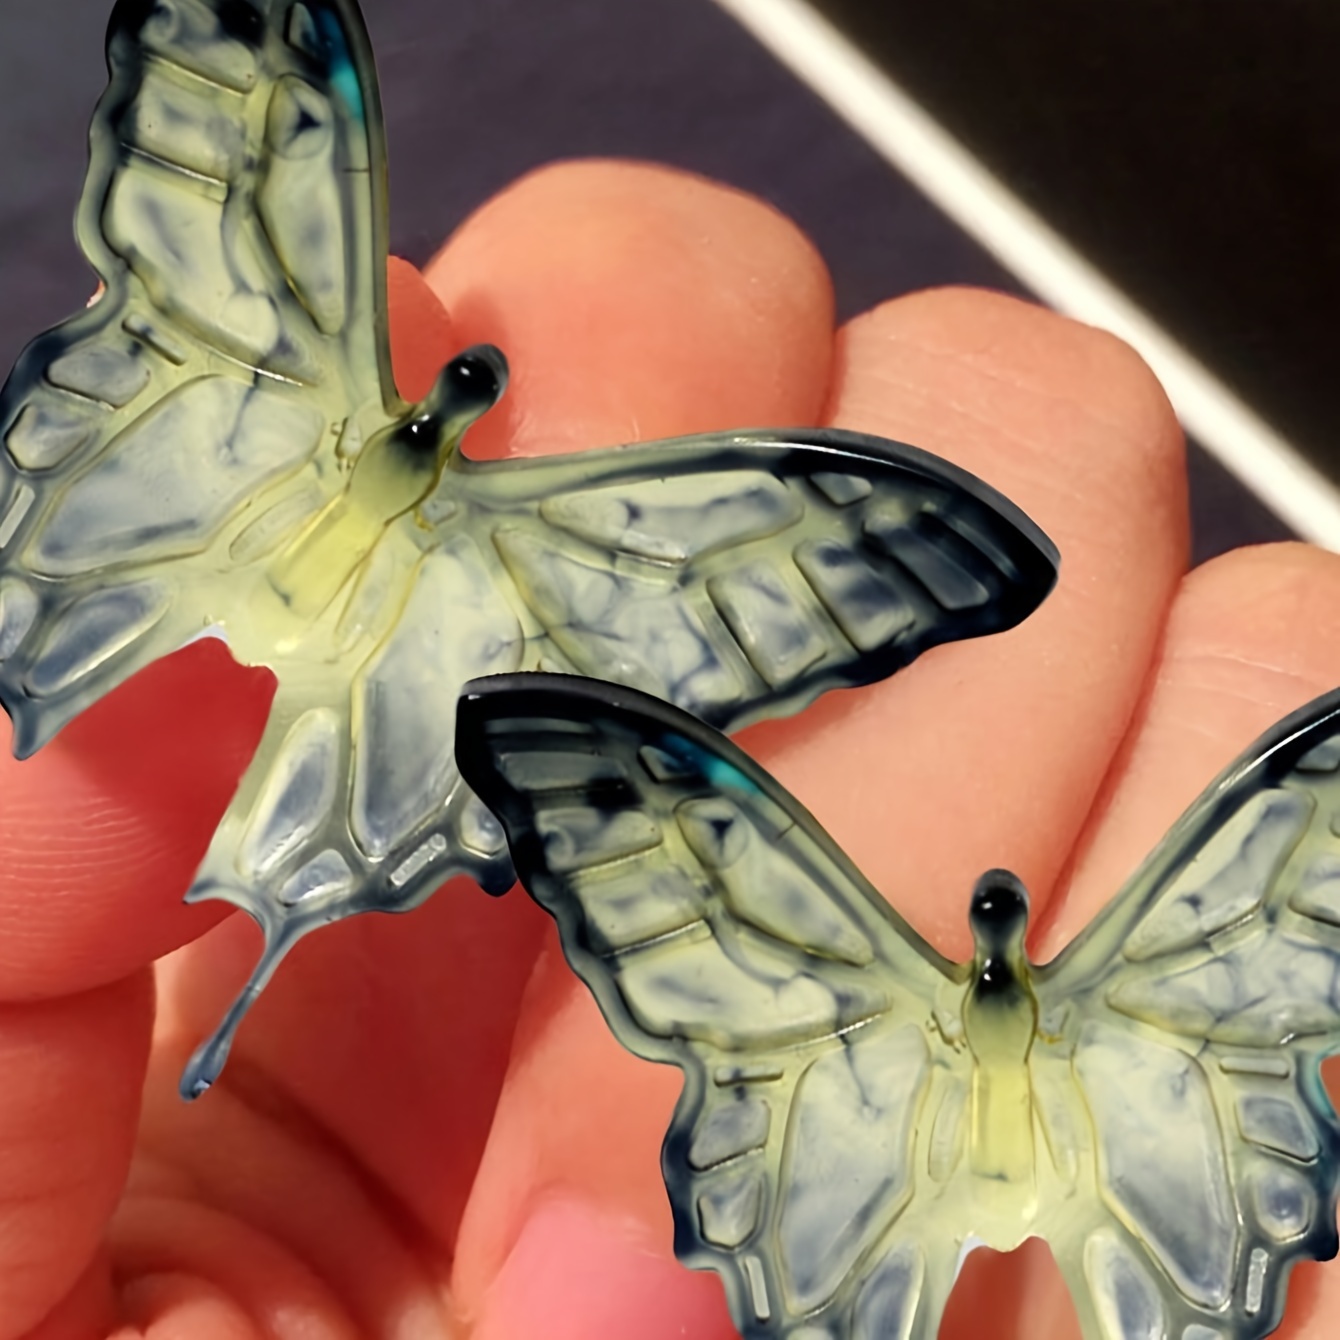 Transparent 6 Kinds Of Butterfly Pendant Silicone Mold For - Temu